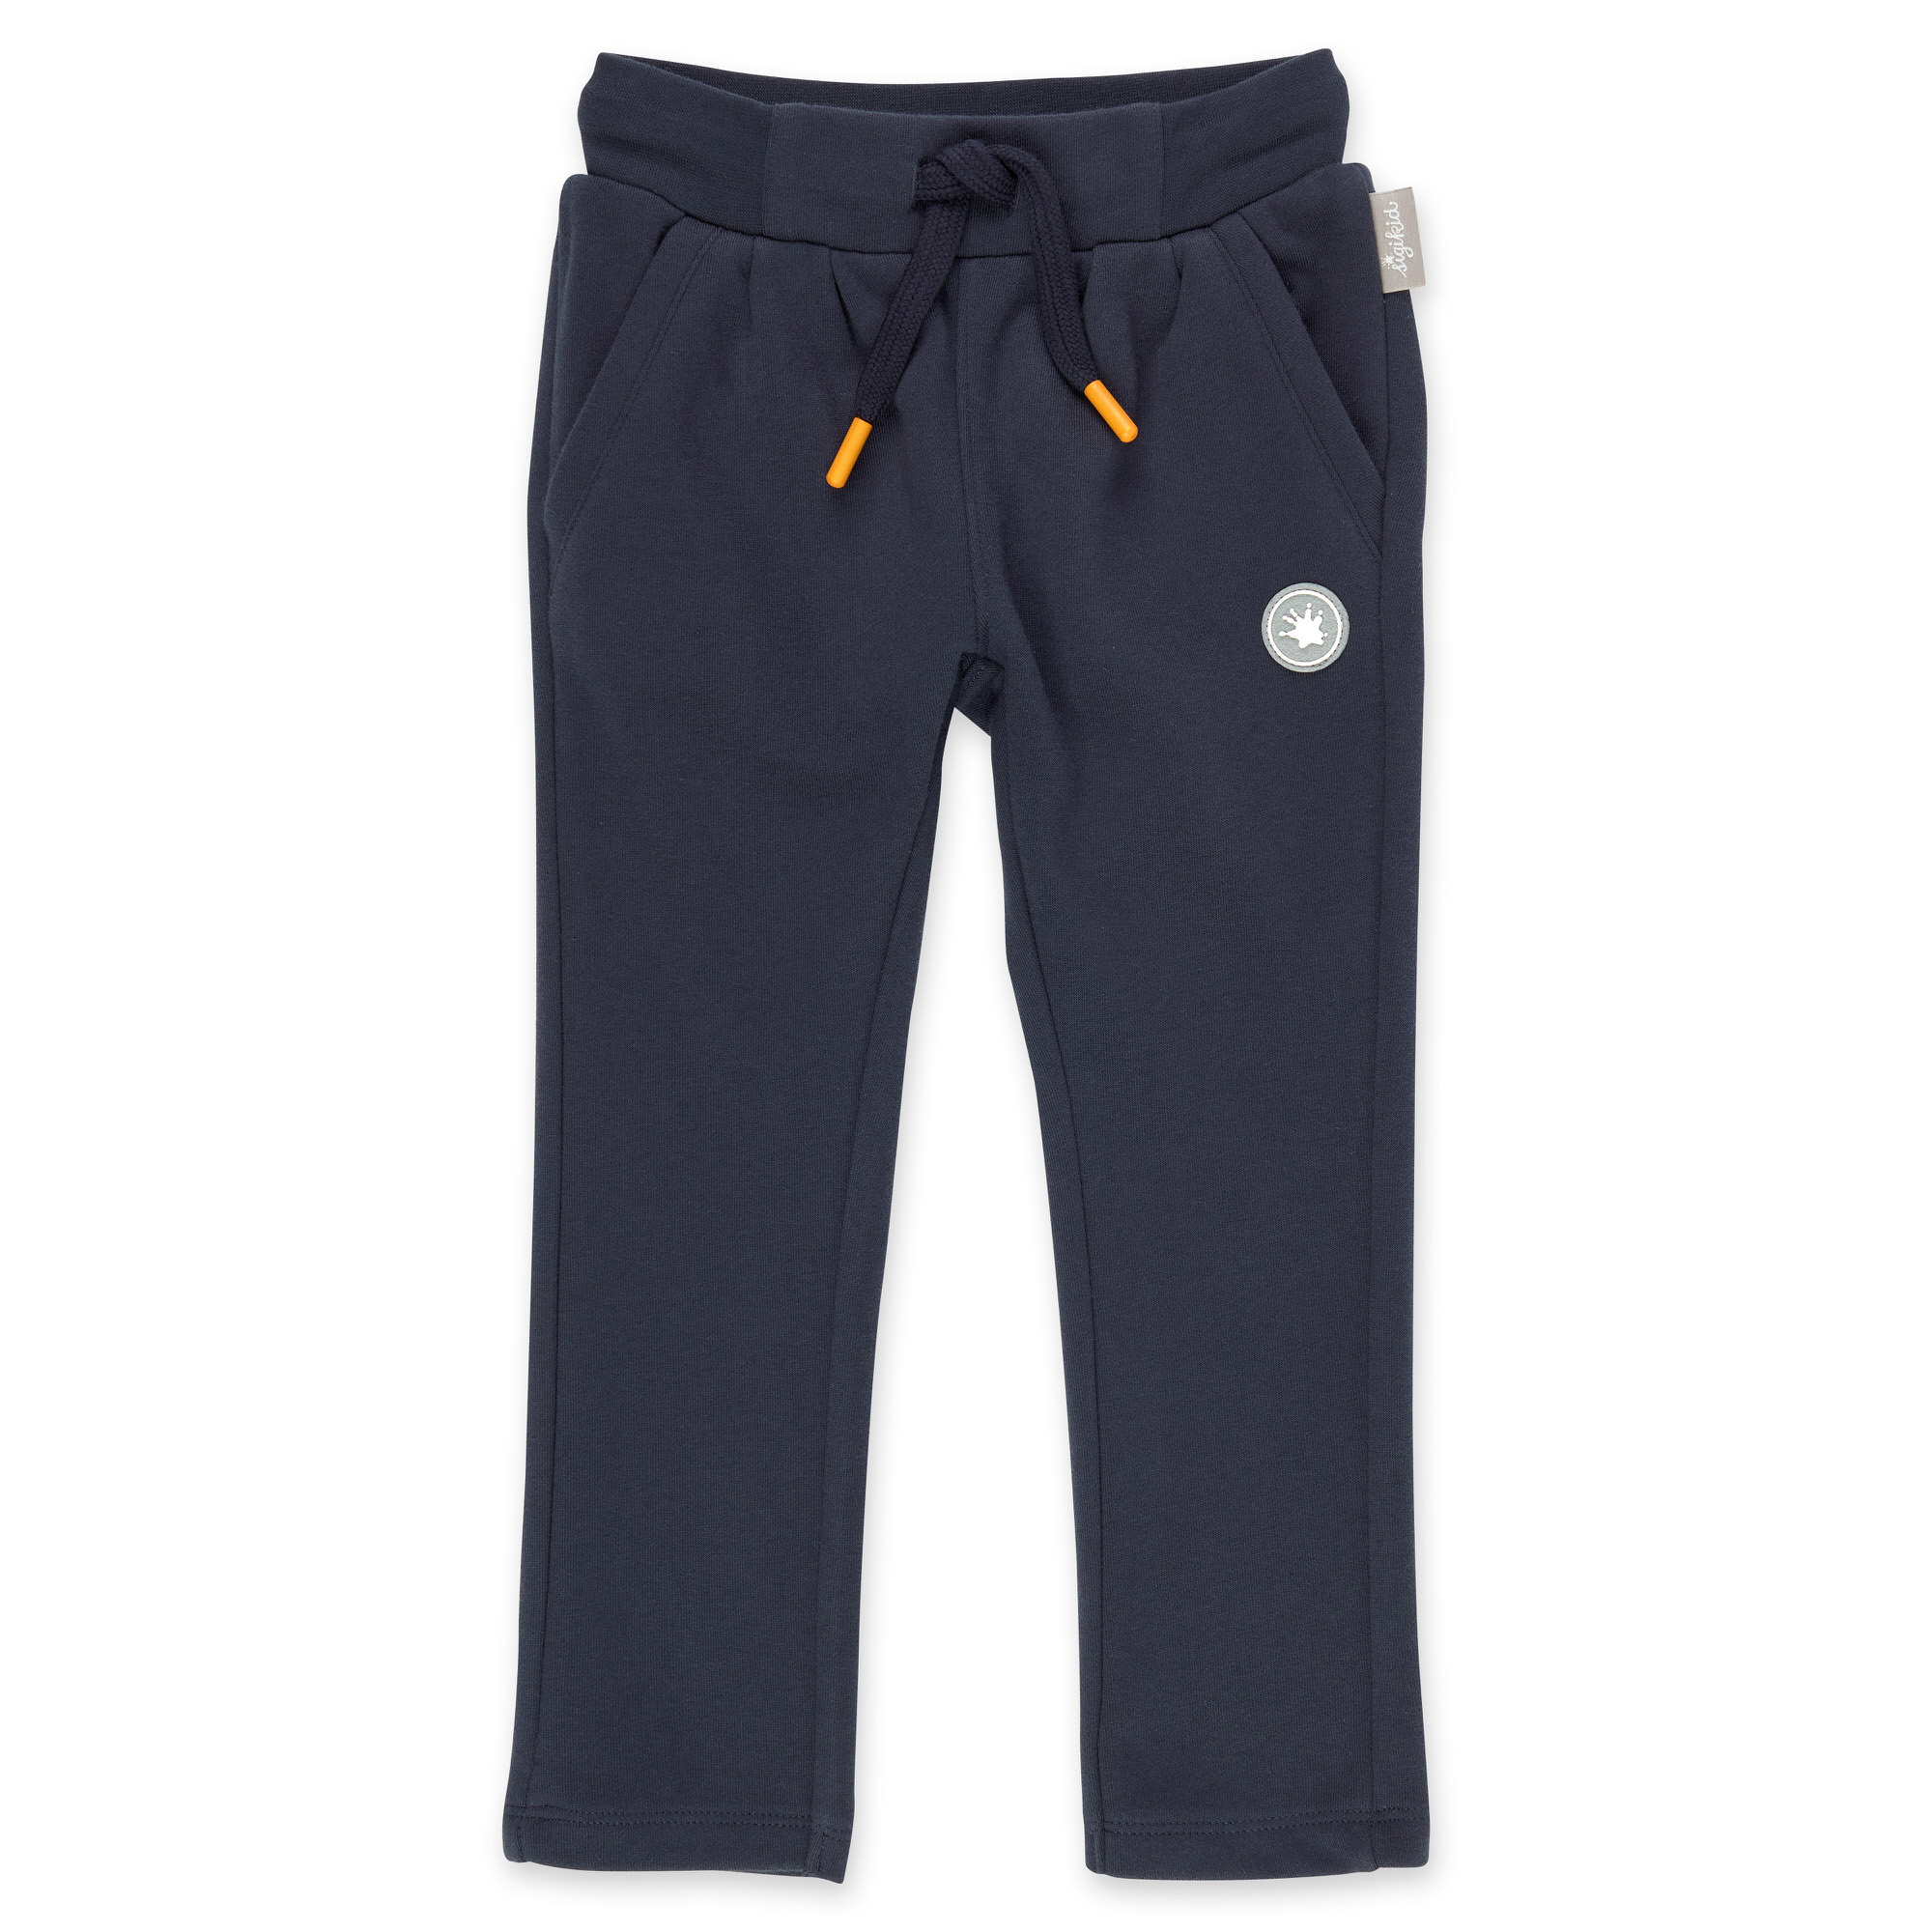 Snug kids' sweat pants with  flower embroidery, navy